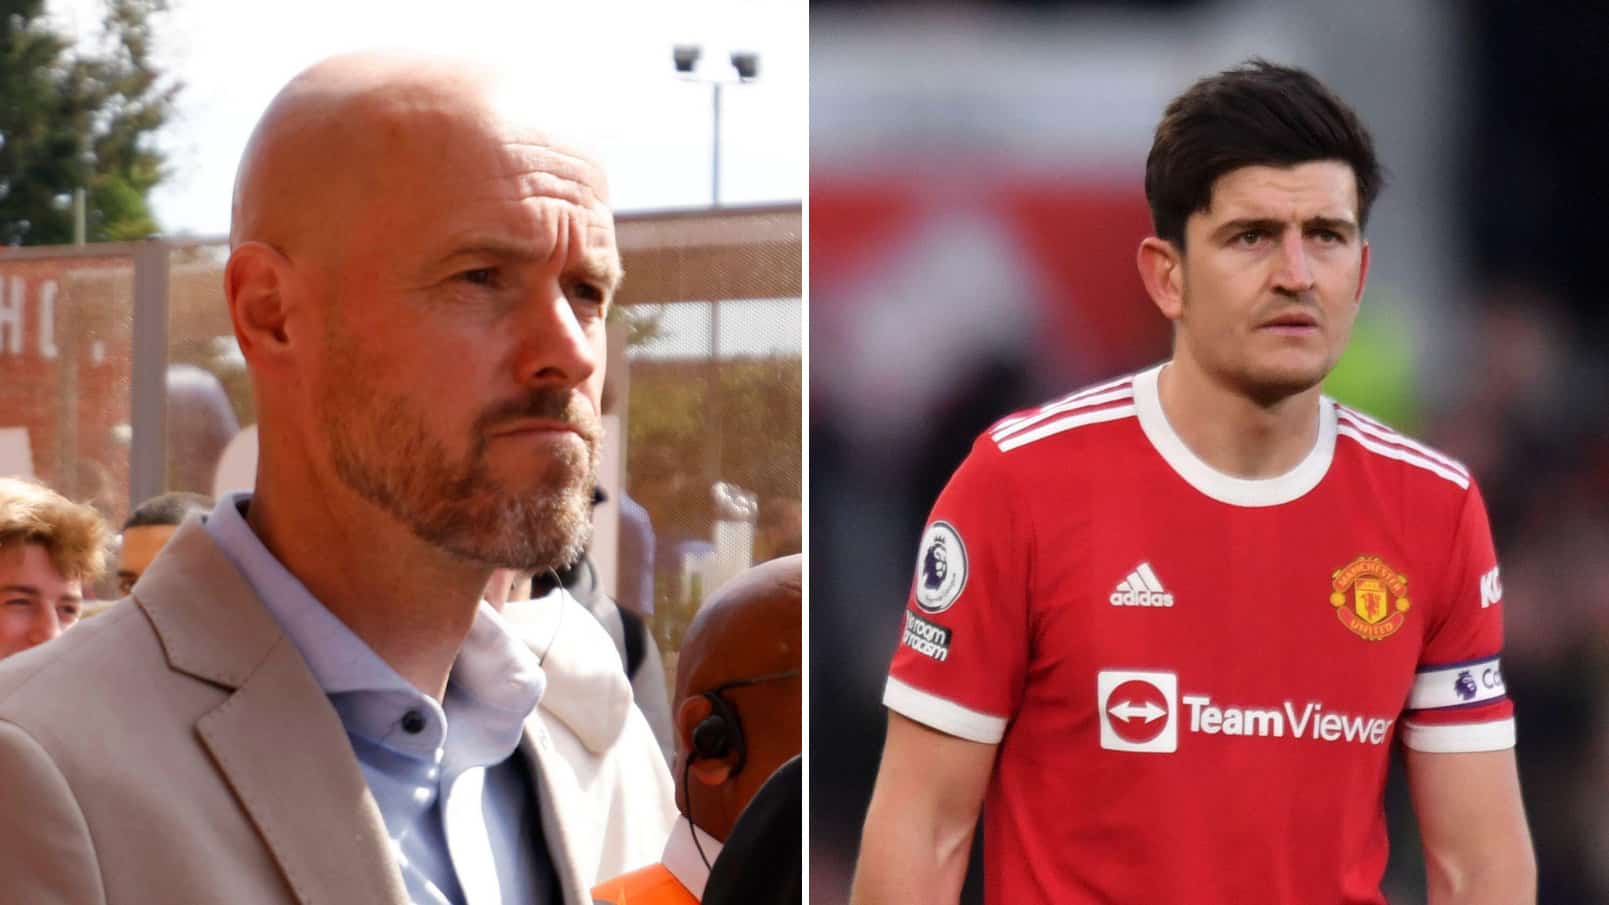 Erik ten Hag on why he wants a “winner” for Manchester United captain